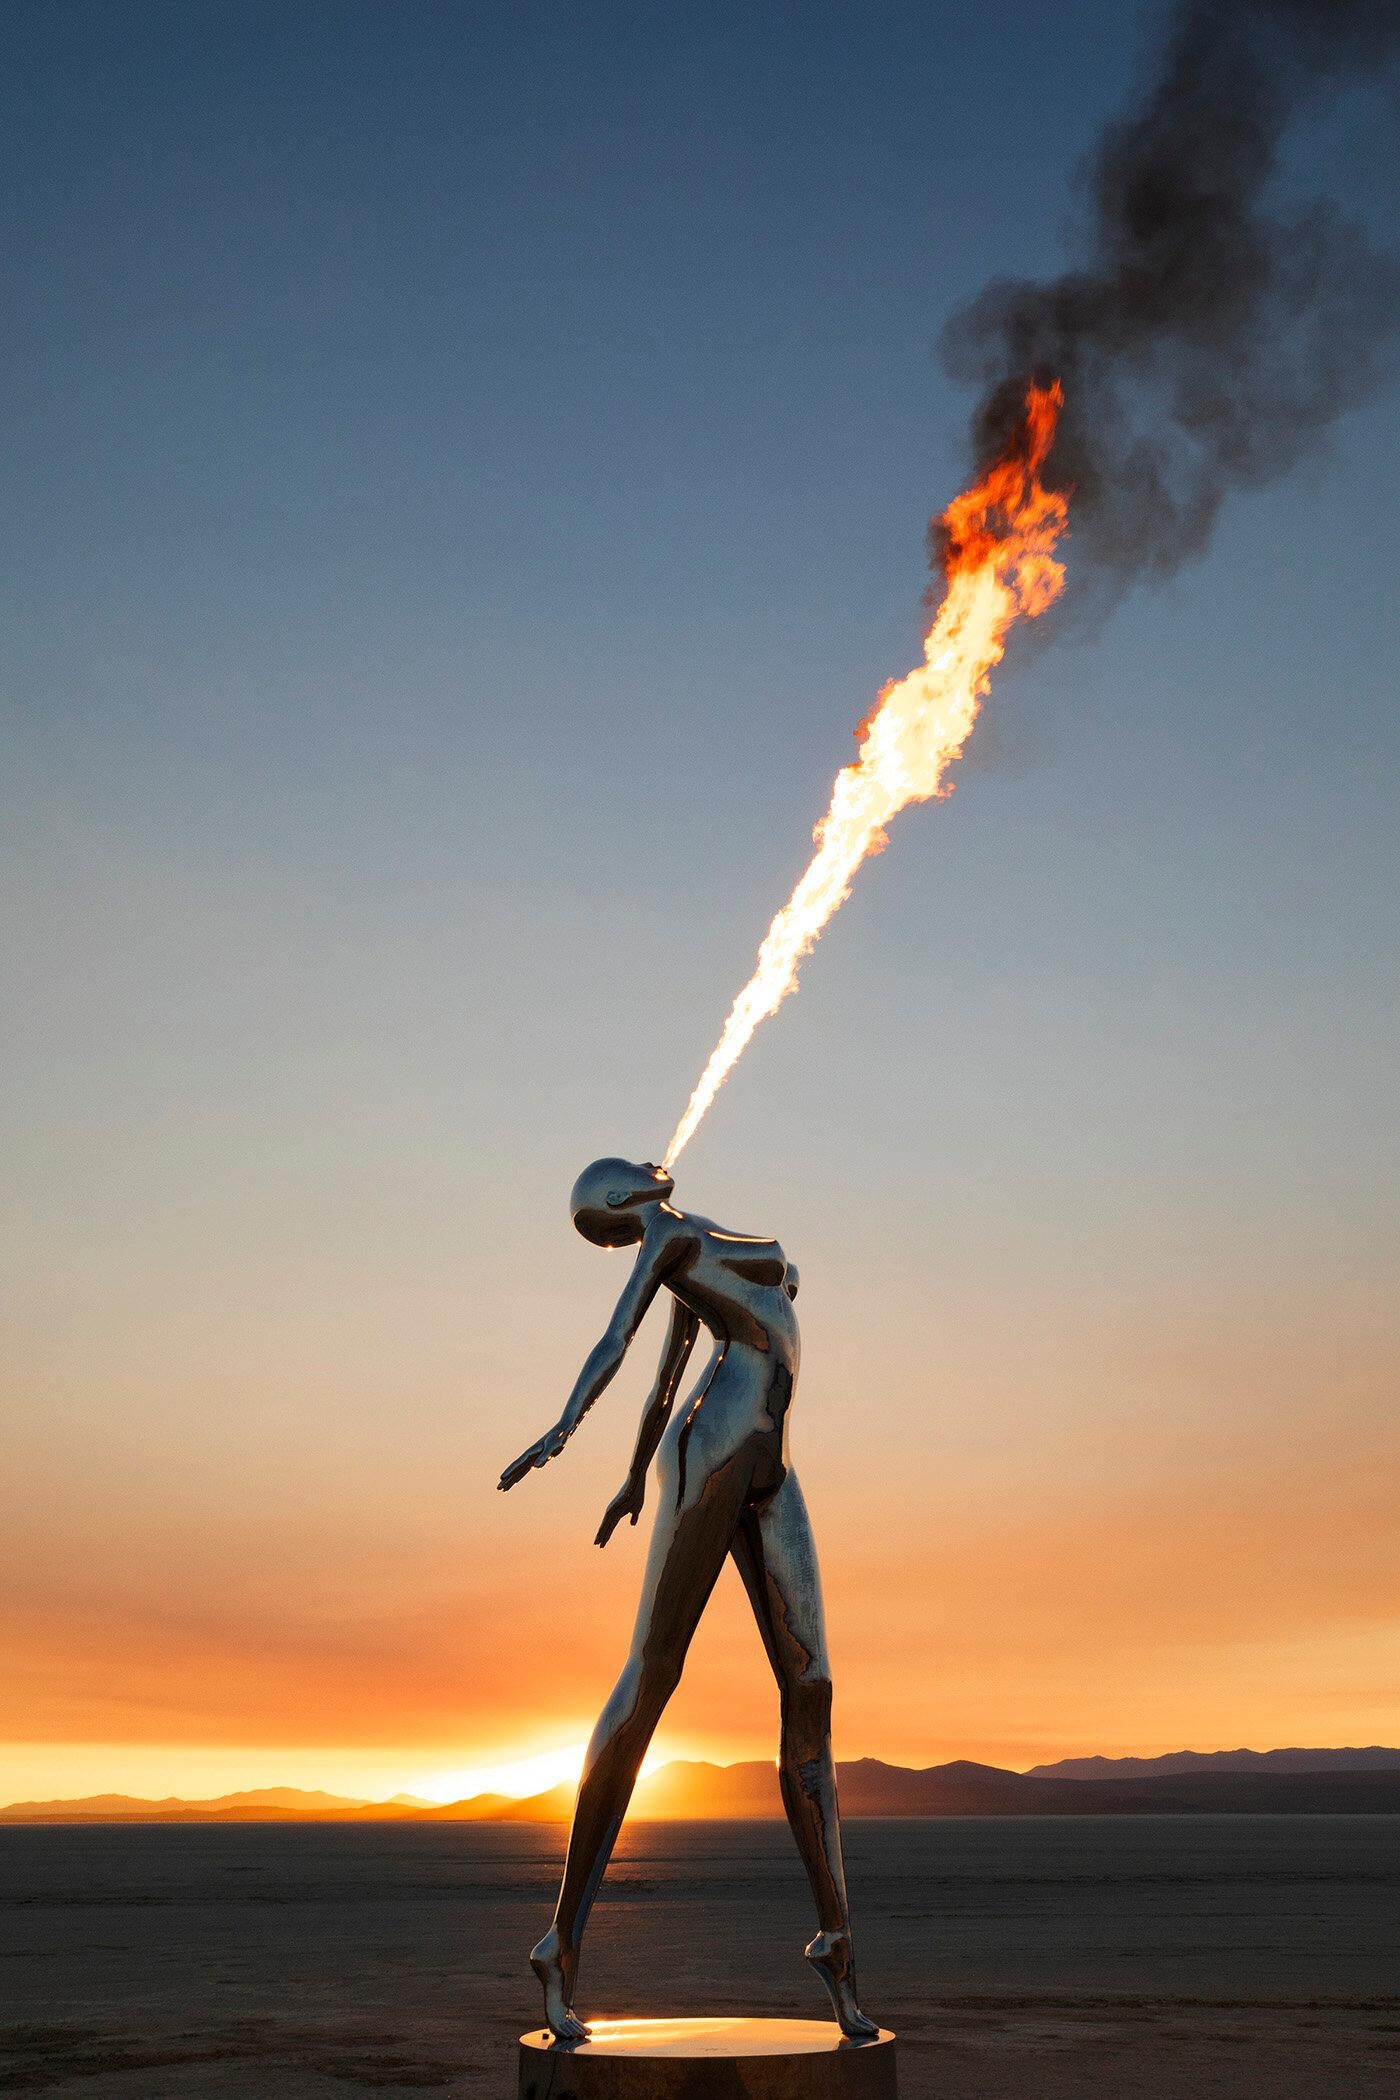 Michael Benisty
RISE
Signed by artist
Mirror polished stainless steel, fire breathing sculpture

Available in the following sizes:
14ft 
21ft

Please contact us at Art Angels for more information.